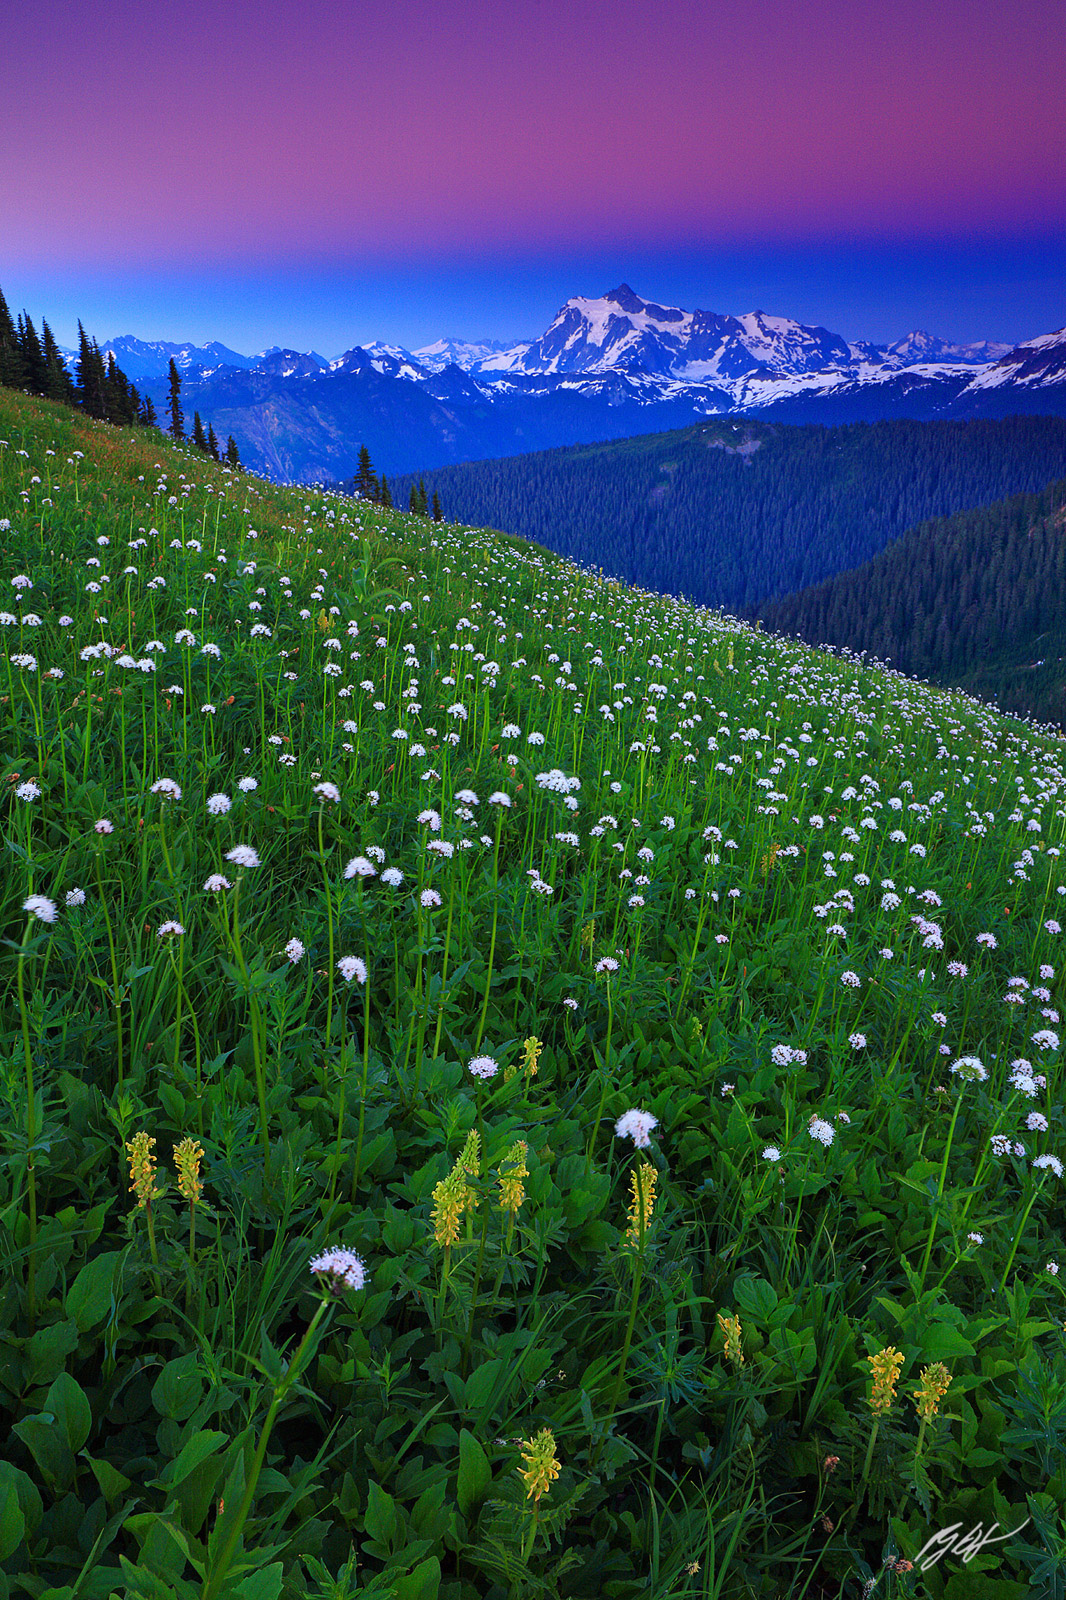 Sunset Alpenglow with wildflowers and Mt Shuksan from Skyline Divide in the Mt Baker Wilderness in Washington